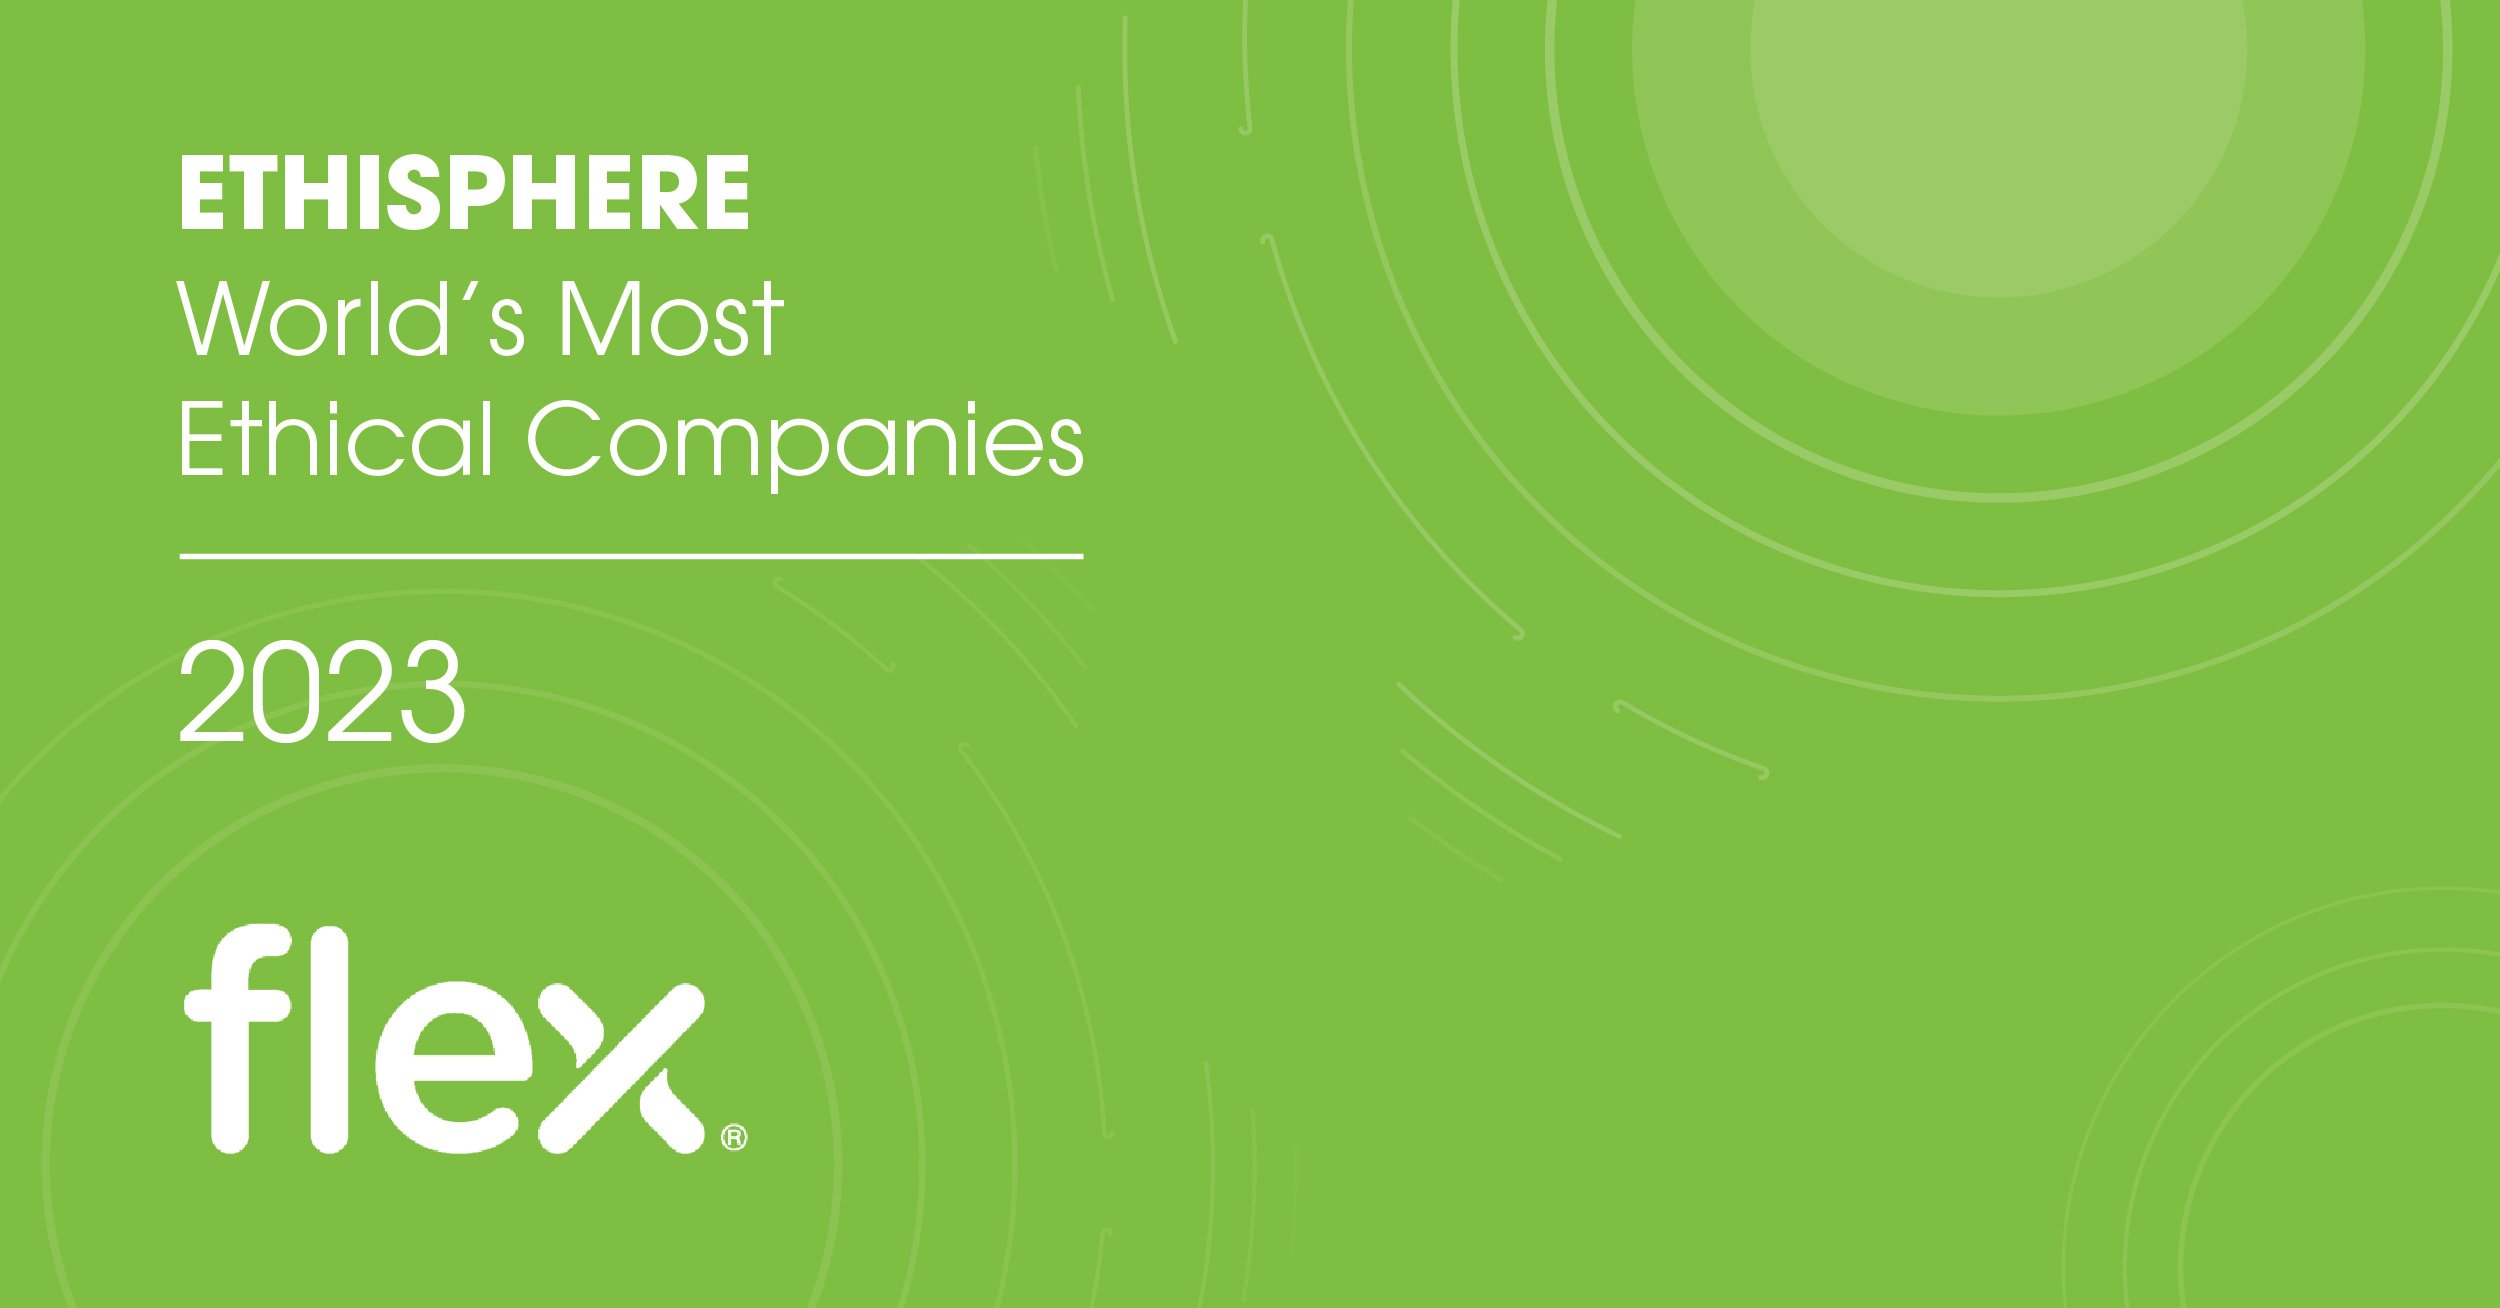 Ethisphere Recognizes Flex as One of the World’s Most Ethical Companies